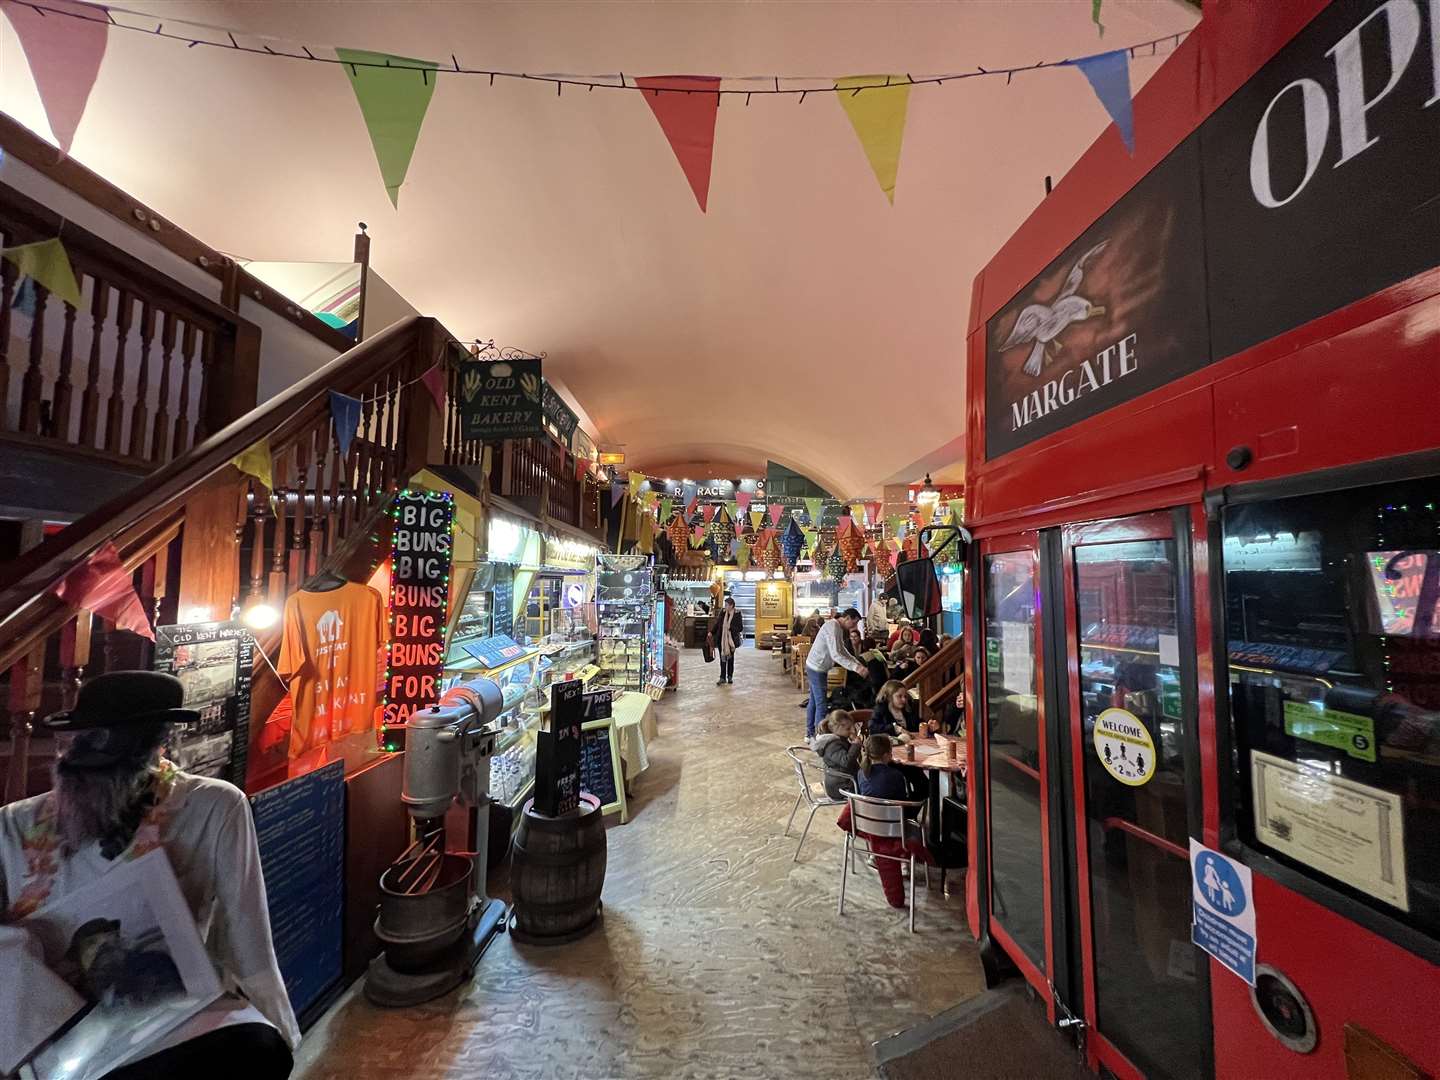 Yes, if you wanted a double decker bus, the Old Kent Market allows you to eat on the top deck